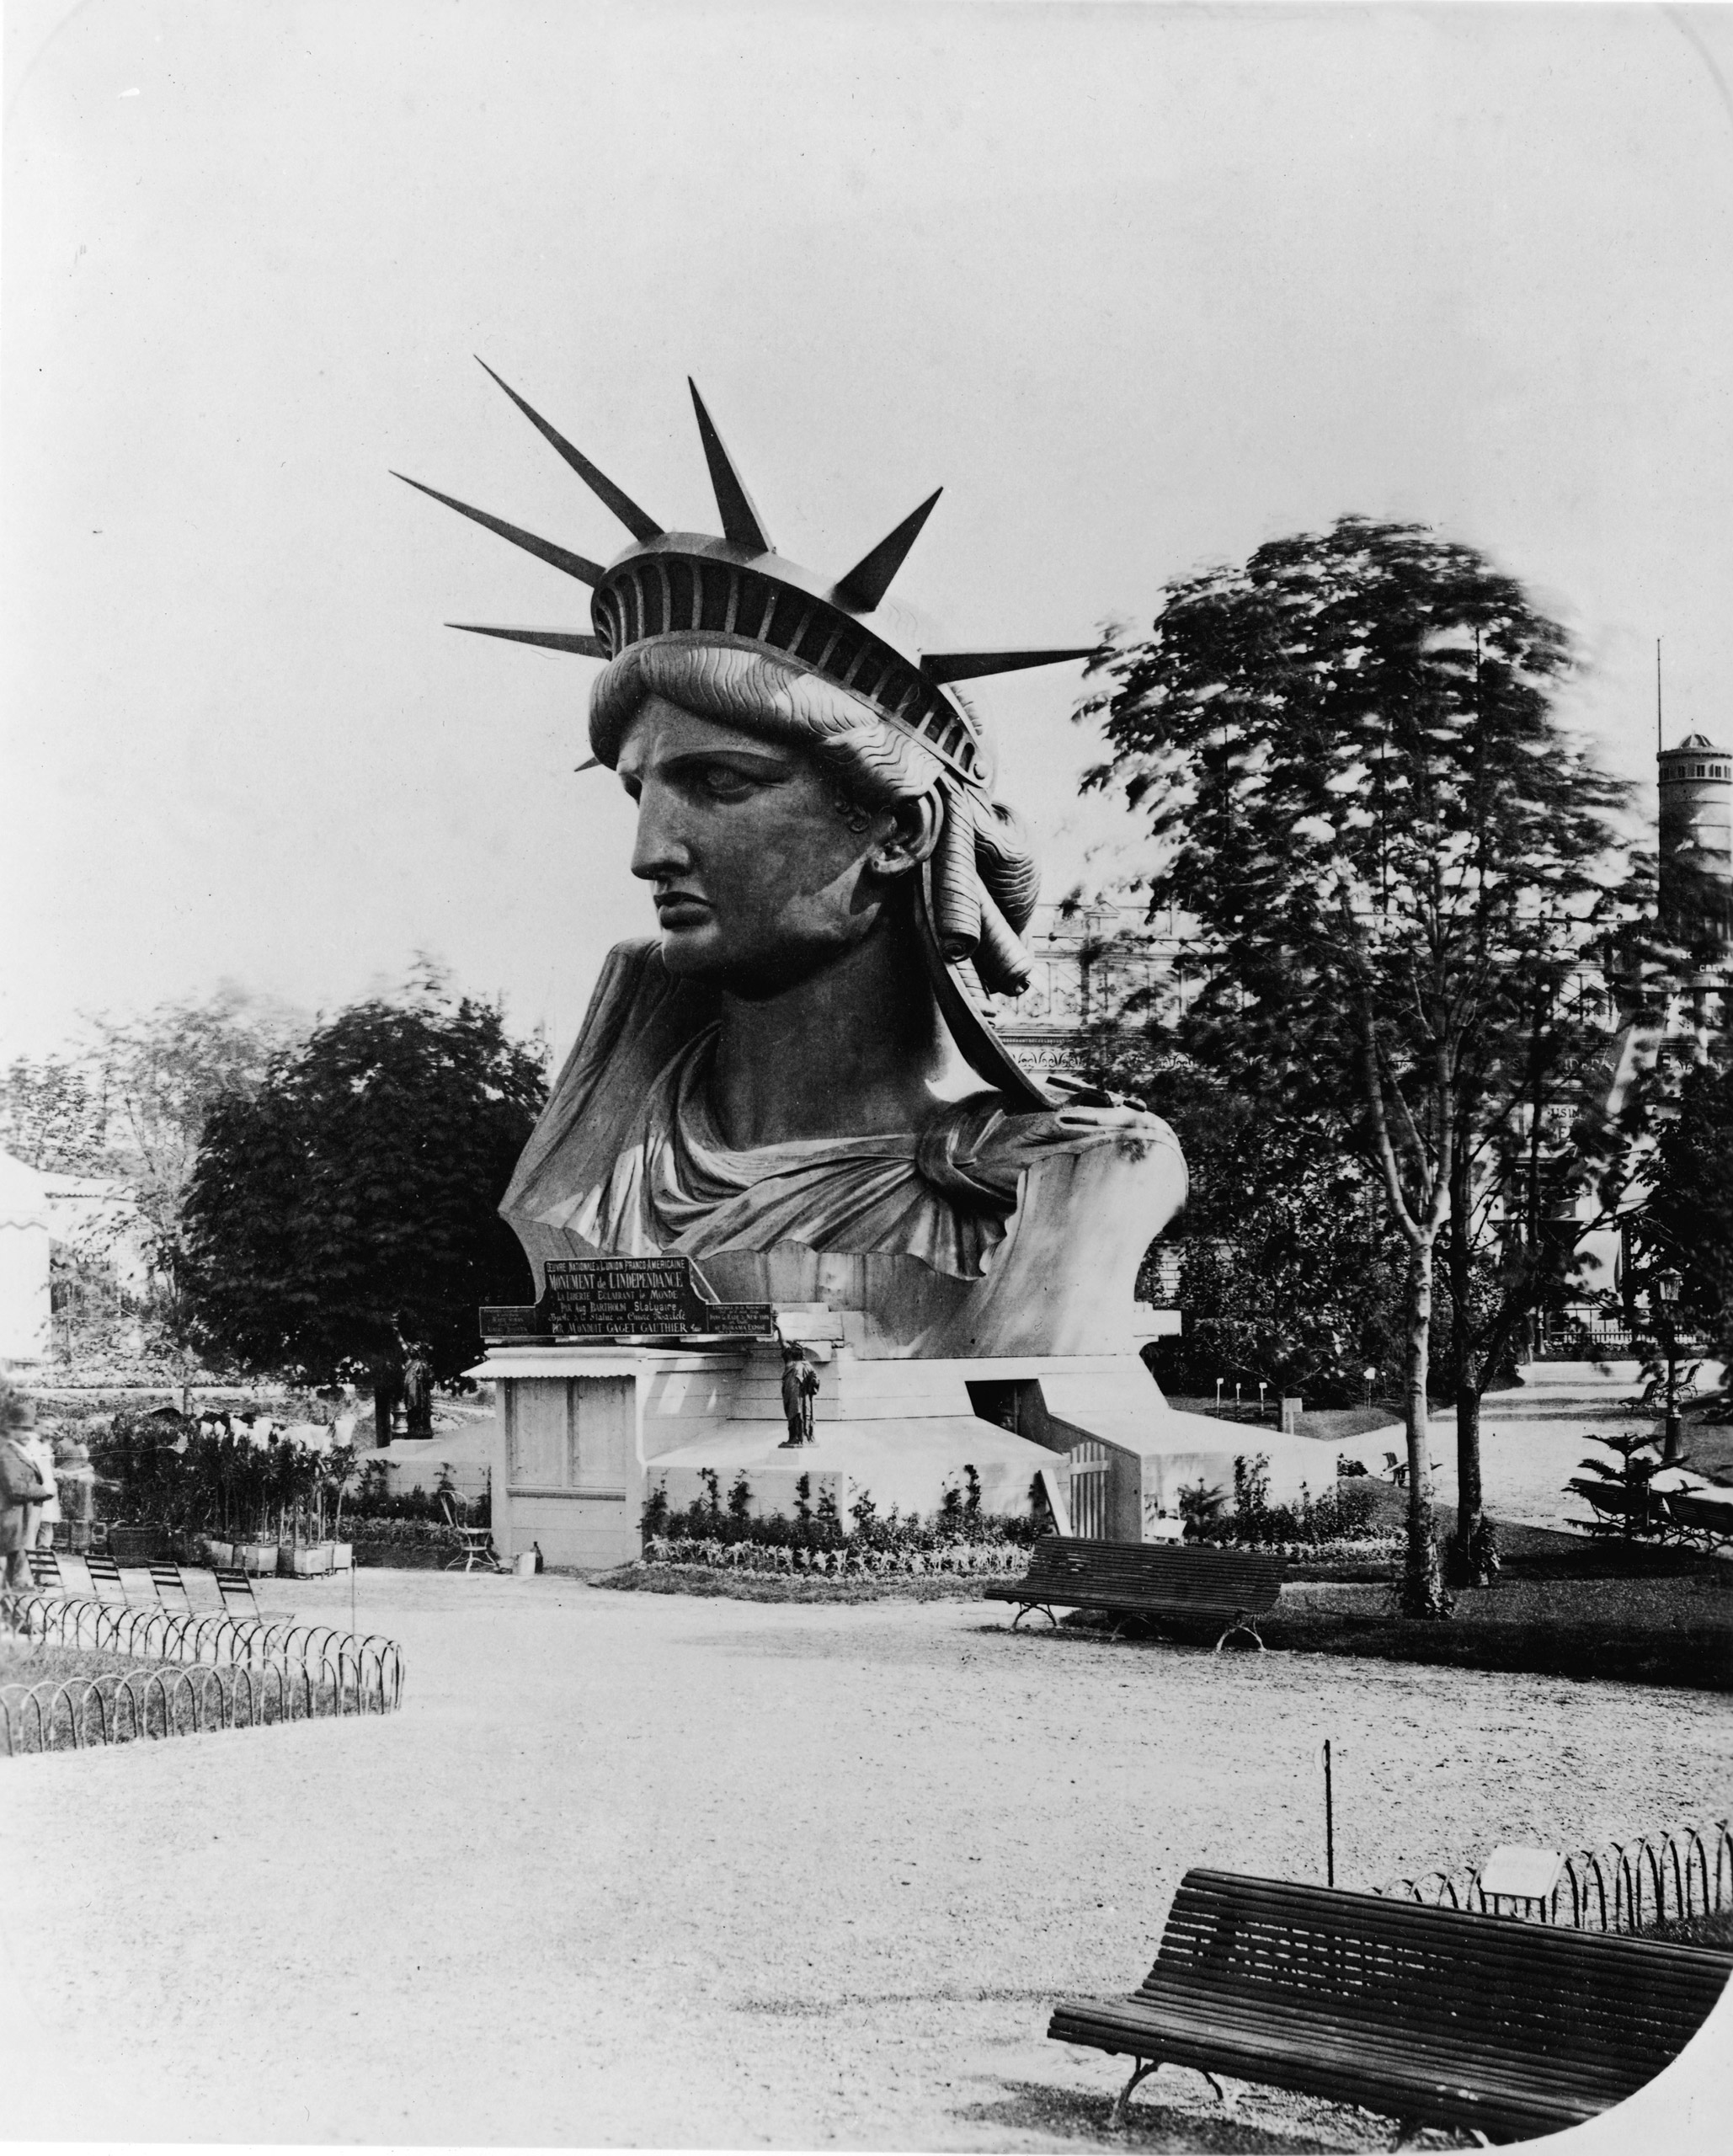 The head of the Statue of Liberty on display in the garden at the Champ de Mars at the World's Fair in Paris to drum up support and contributions for the completion of the great project, 1878.